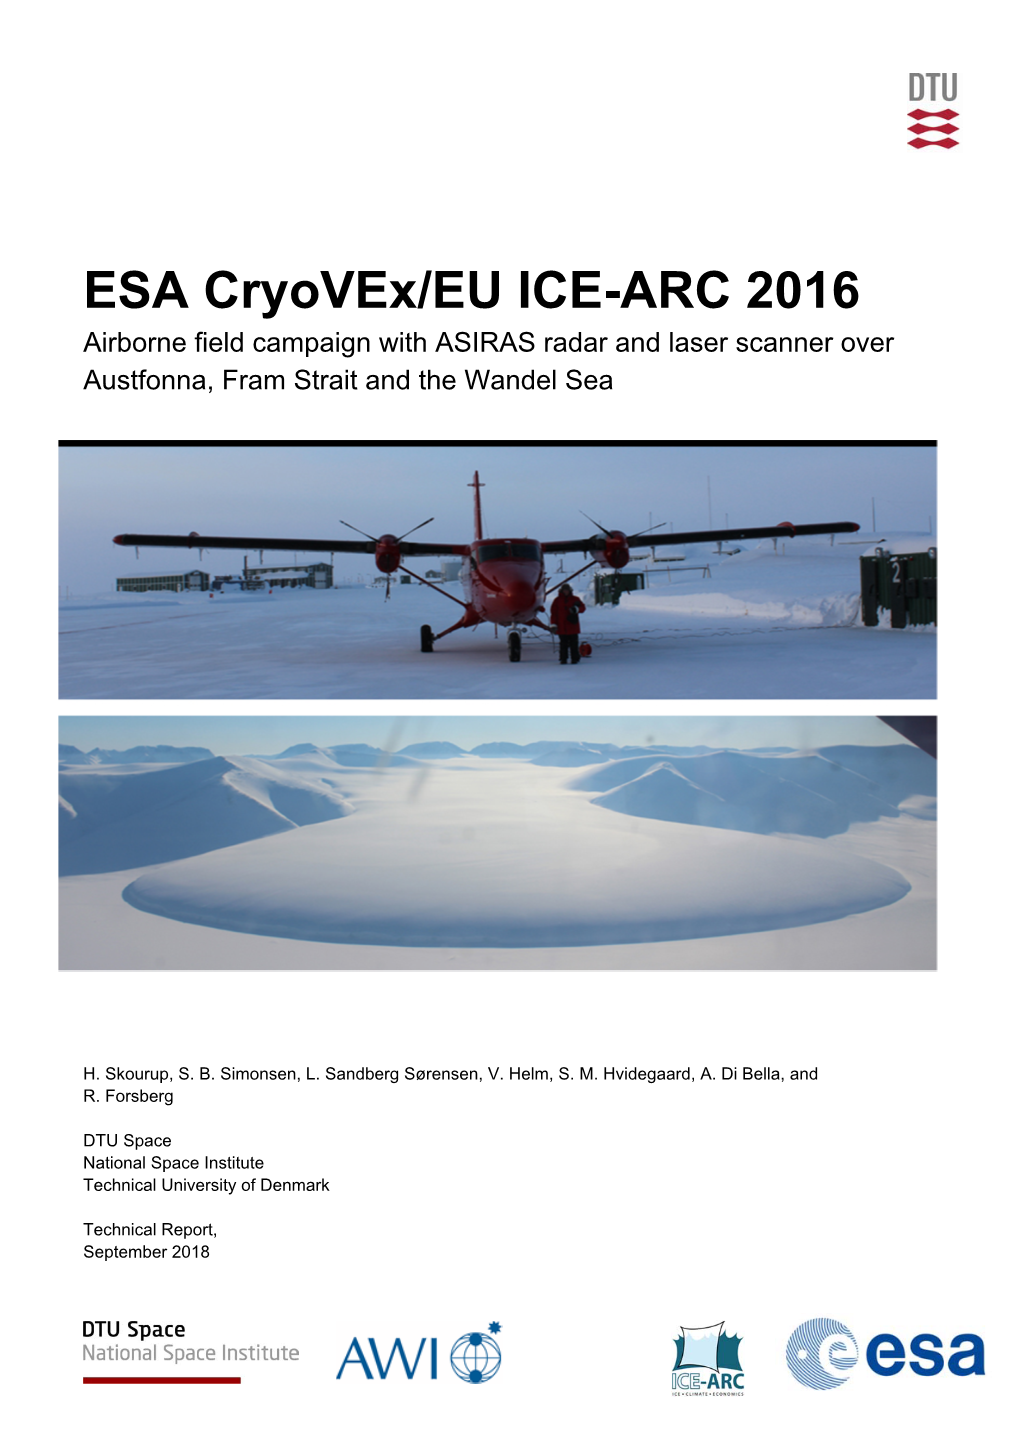 ESA Cryovex/EU ICE-ARC 2016 Airborne Field Campaign with ASIRAS Radar and Laser Scanner Over Austfonna, Fram Strait and the Wandel Sea